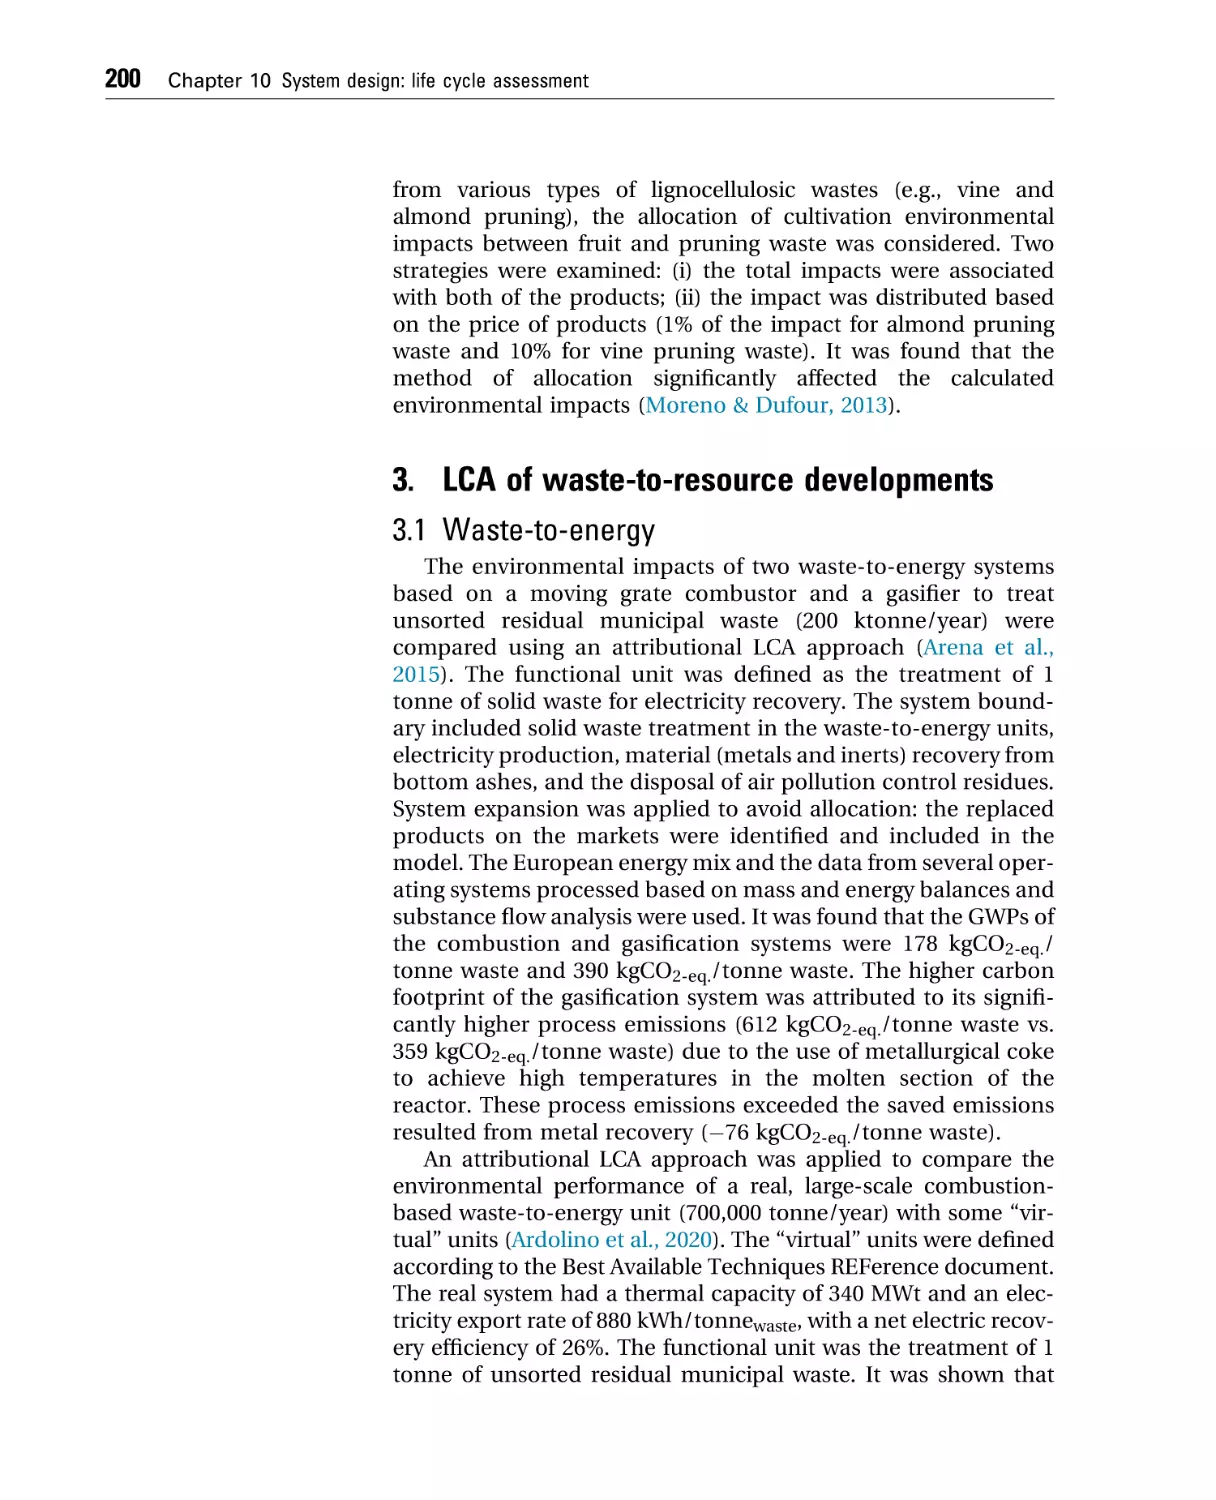 3. LCA of waste-to-resource developments
3.1 Waste-to-energy